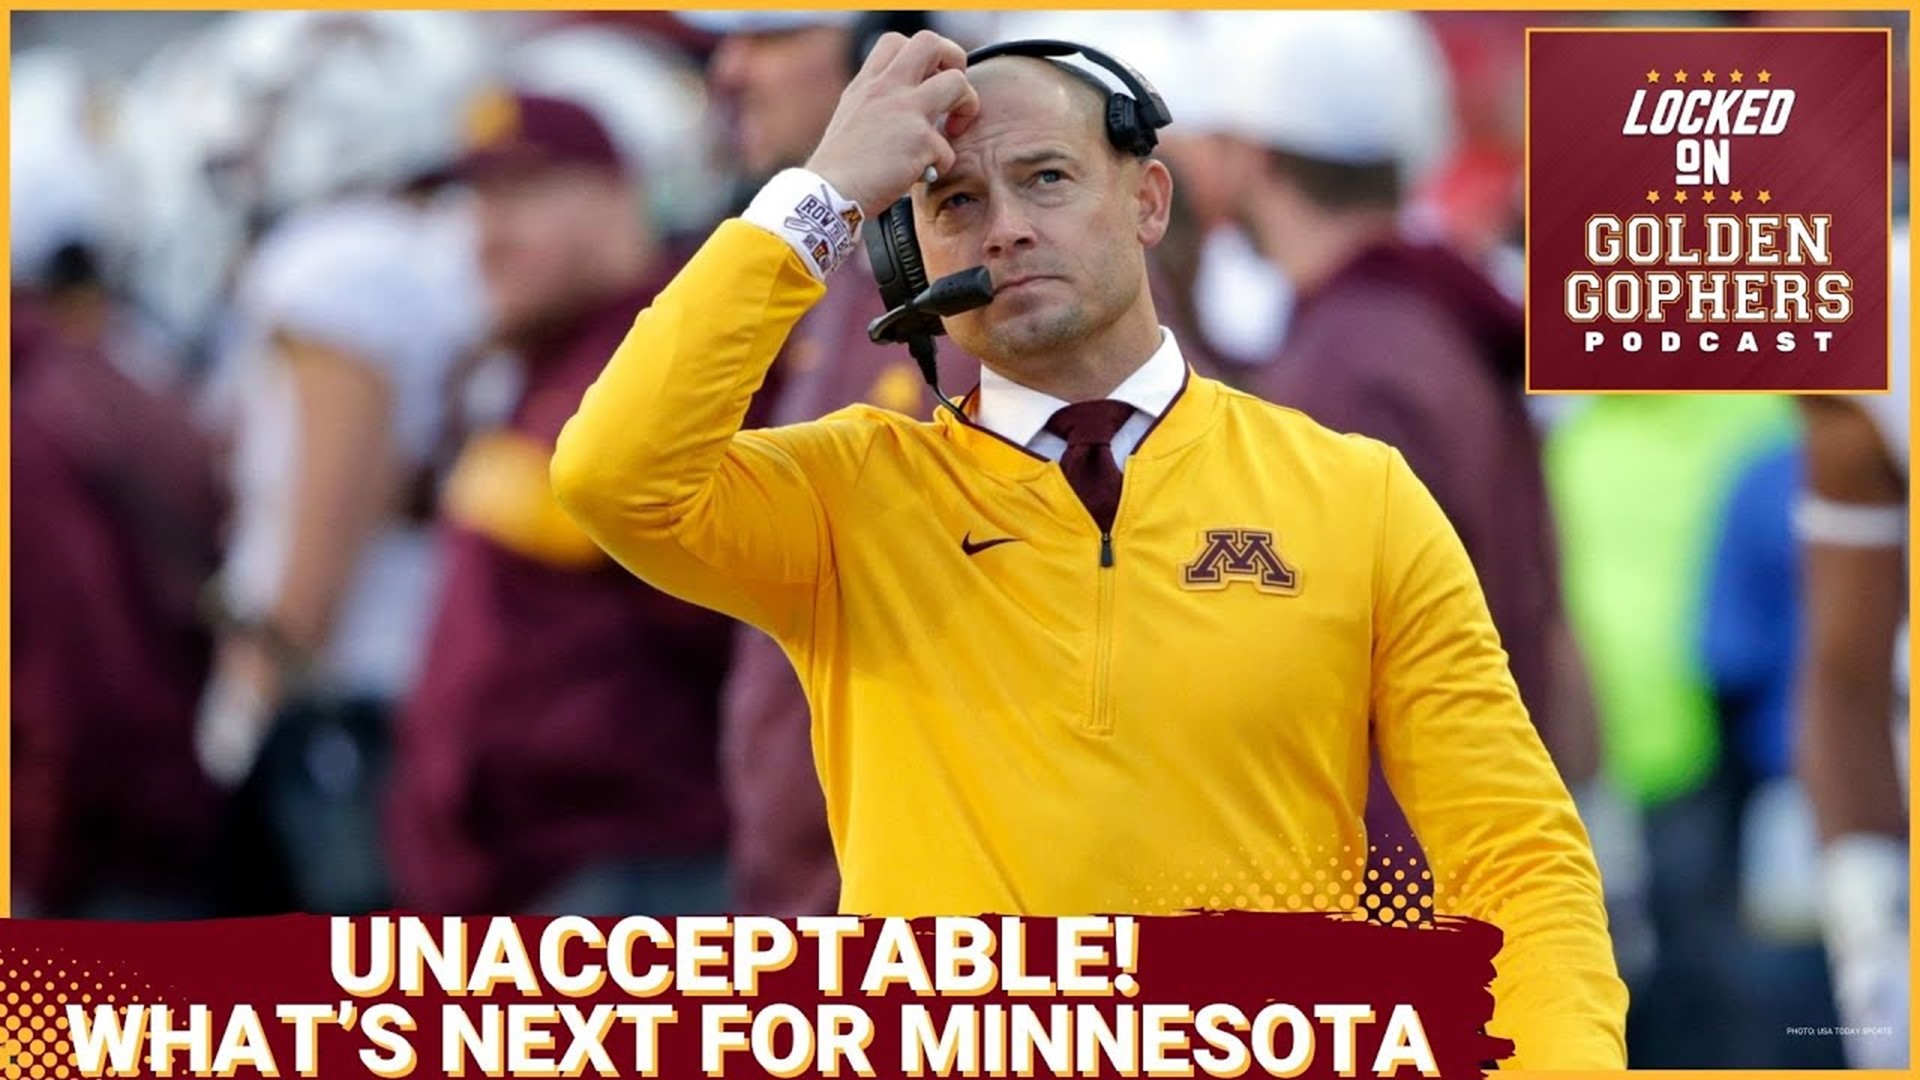 On today's episode of the Locked On Golden Gophers podcast, we discuss the terrible loss the Gophers suffered to Northwestern and the biggest questions we have